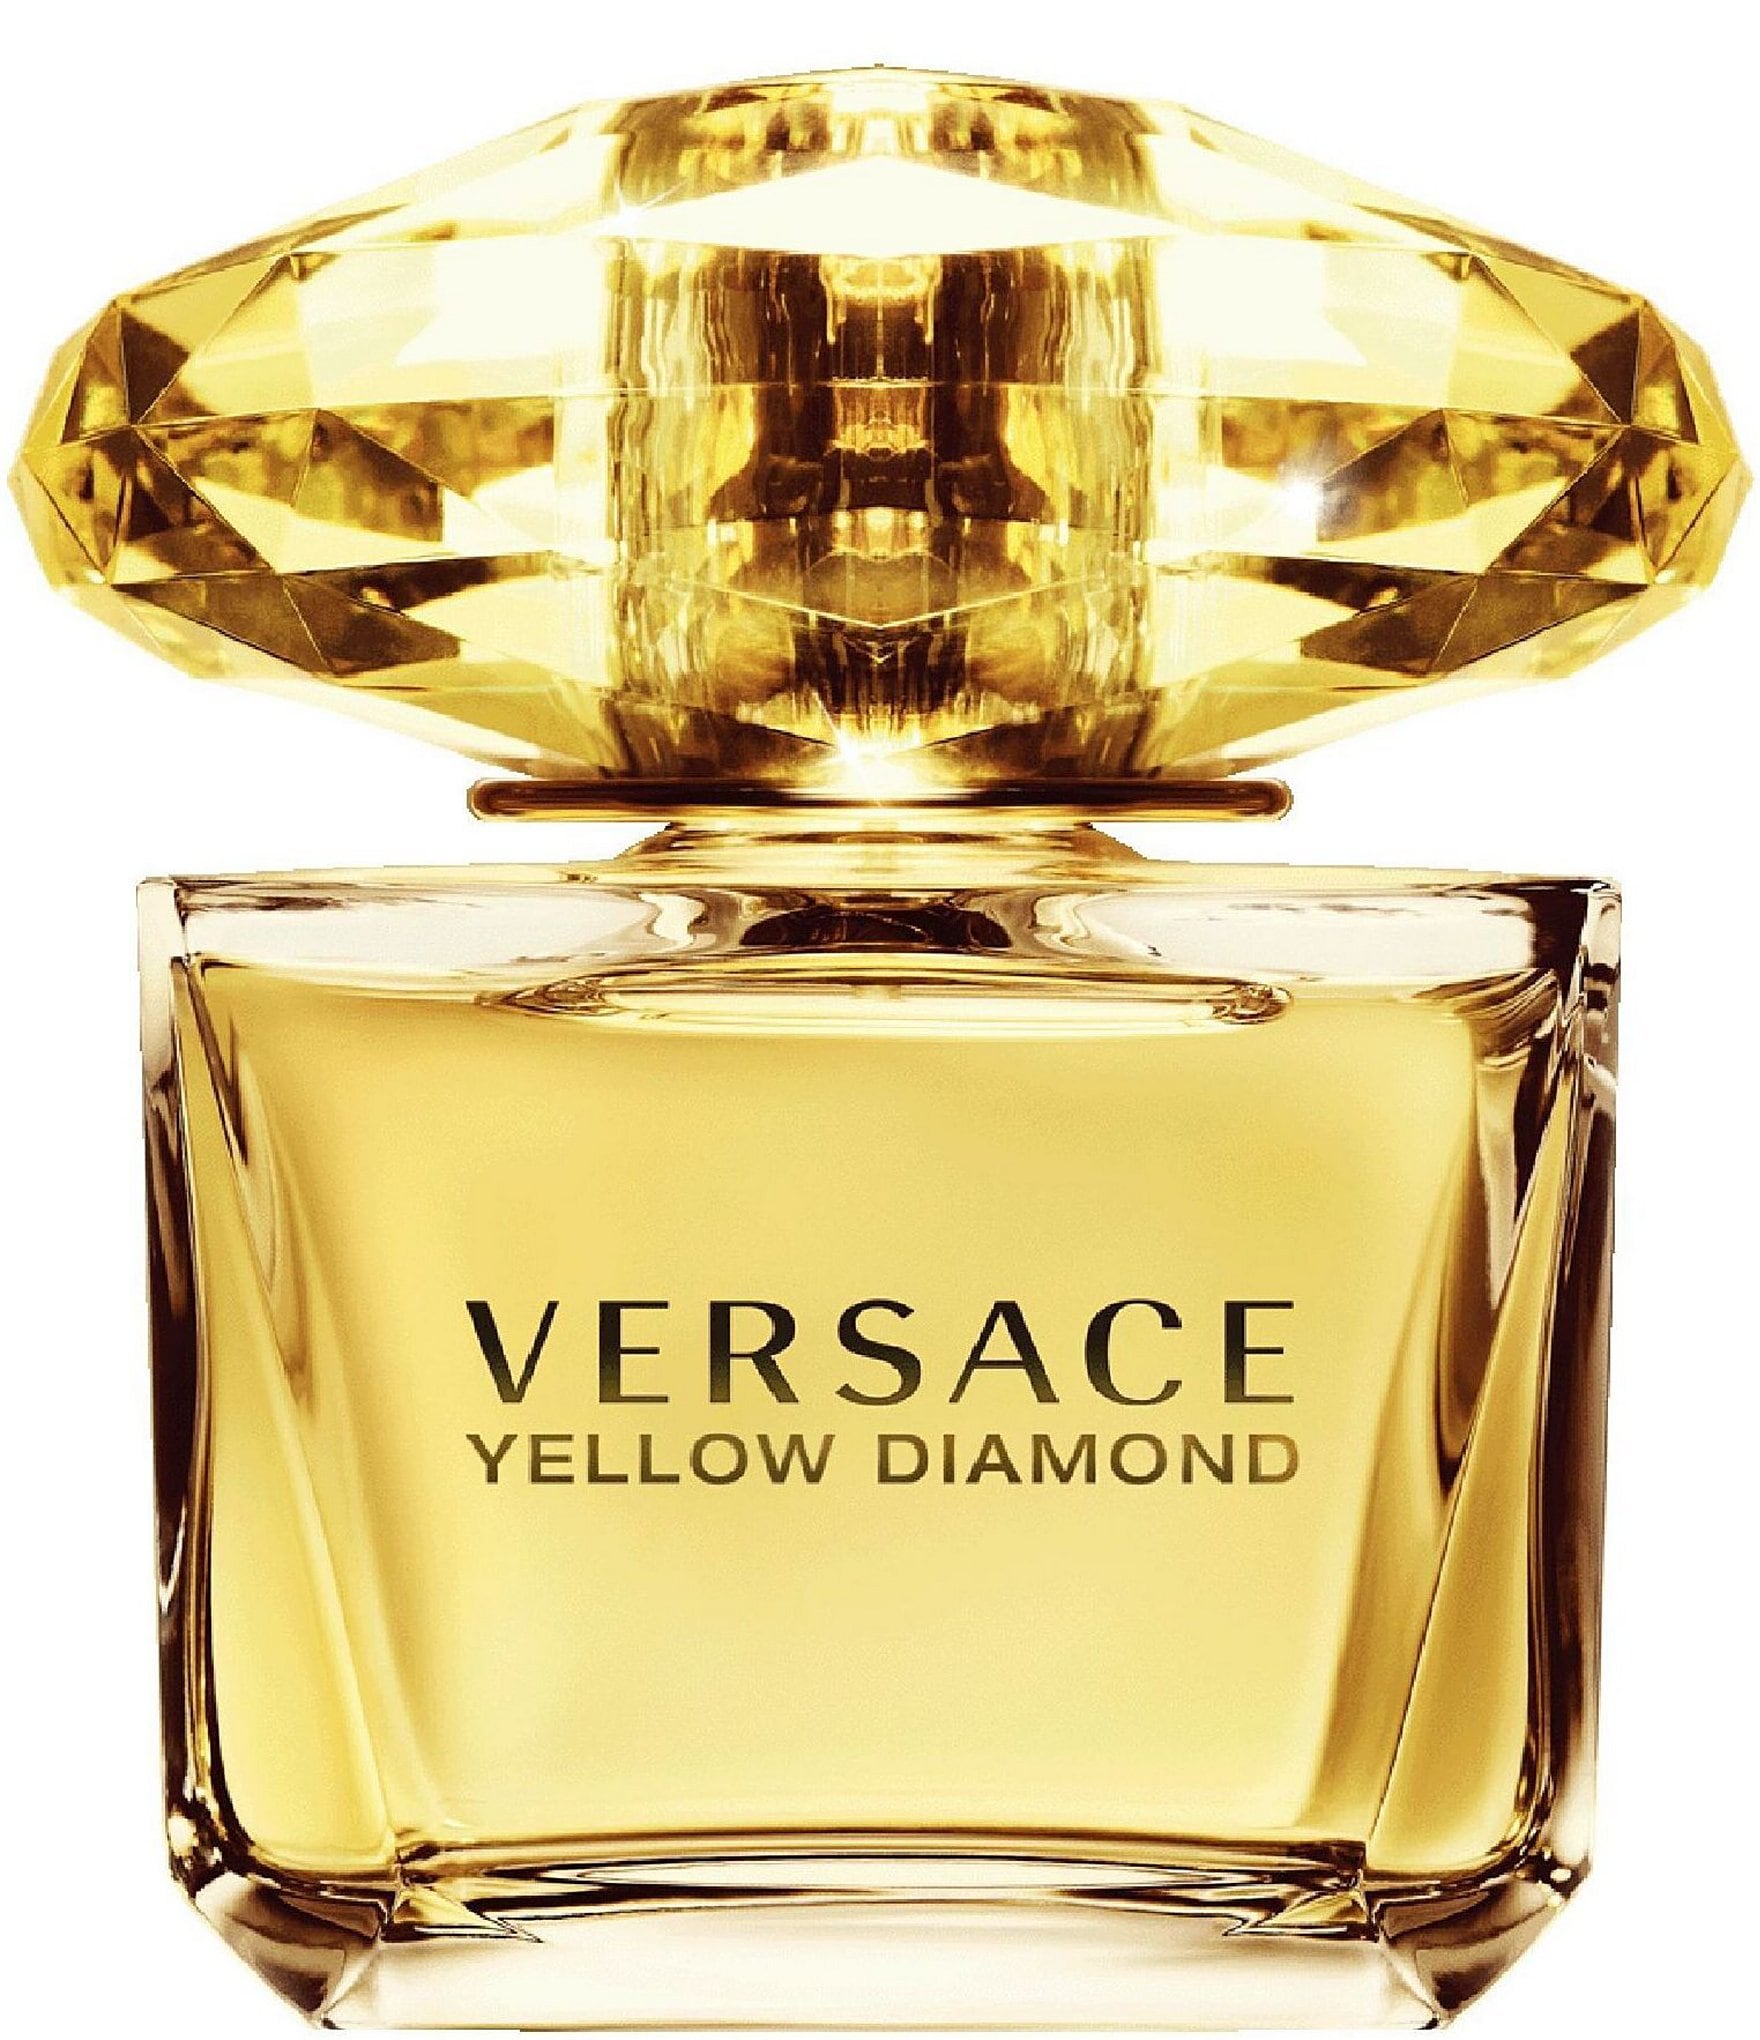 You cant go wrong with the fragrance Versace Bright Crystal.. its a go, versace yellow diamond